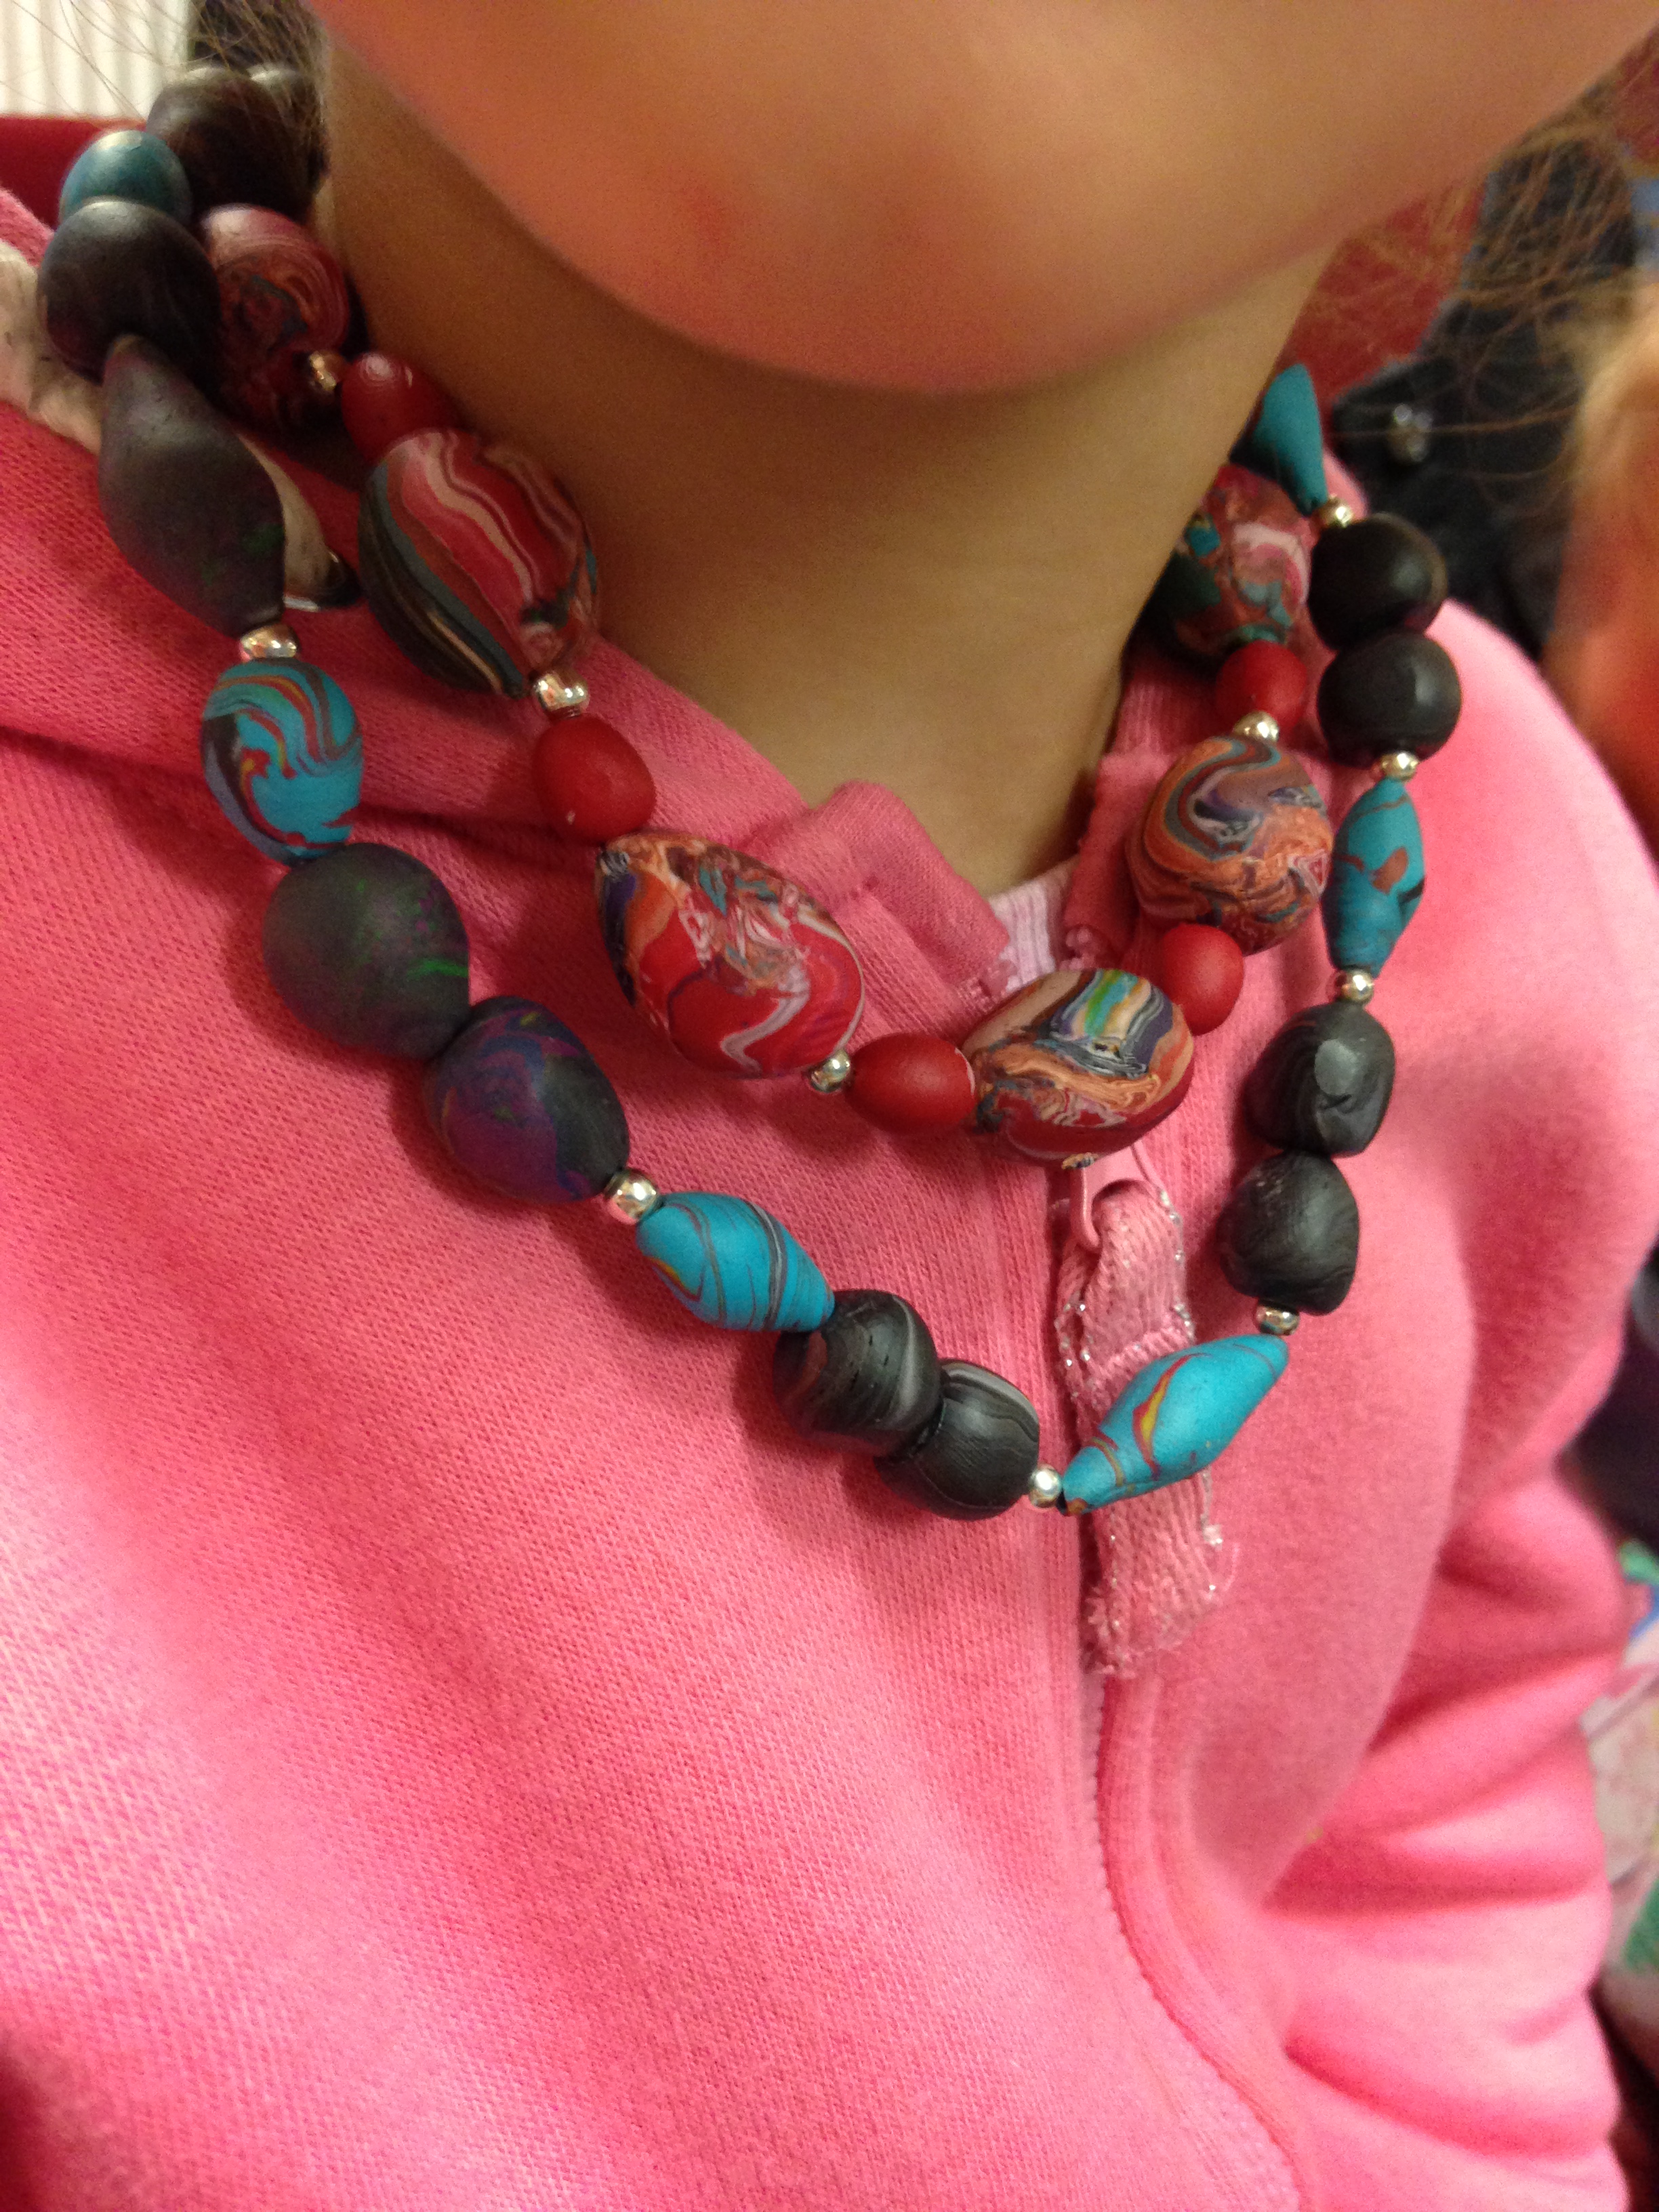 A child is fitting her beautiful polymer clay jewellery pieces